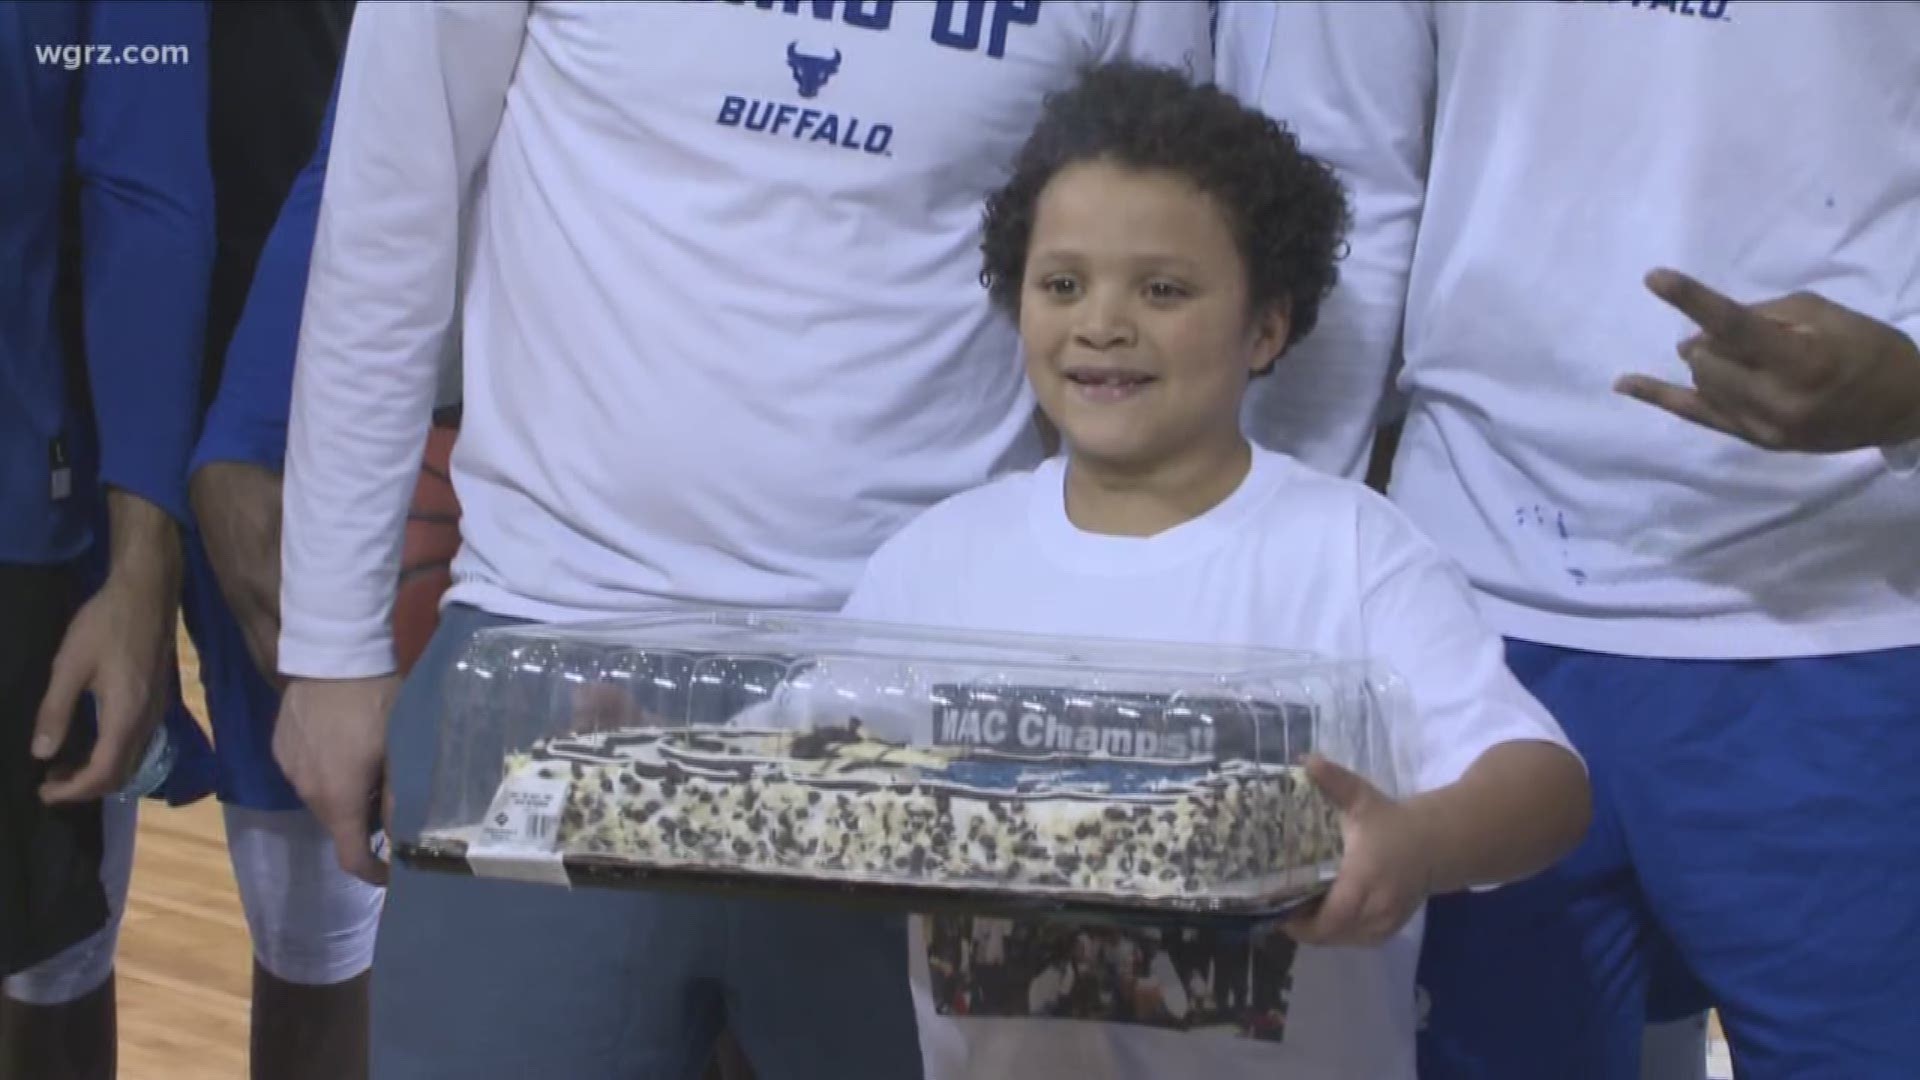 "Baby Shawn" Delivers Cake To UB Teams